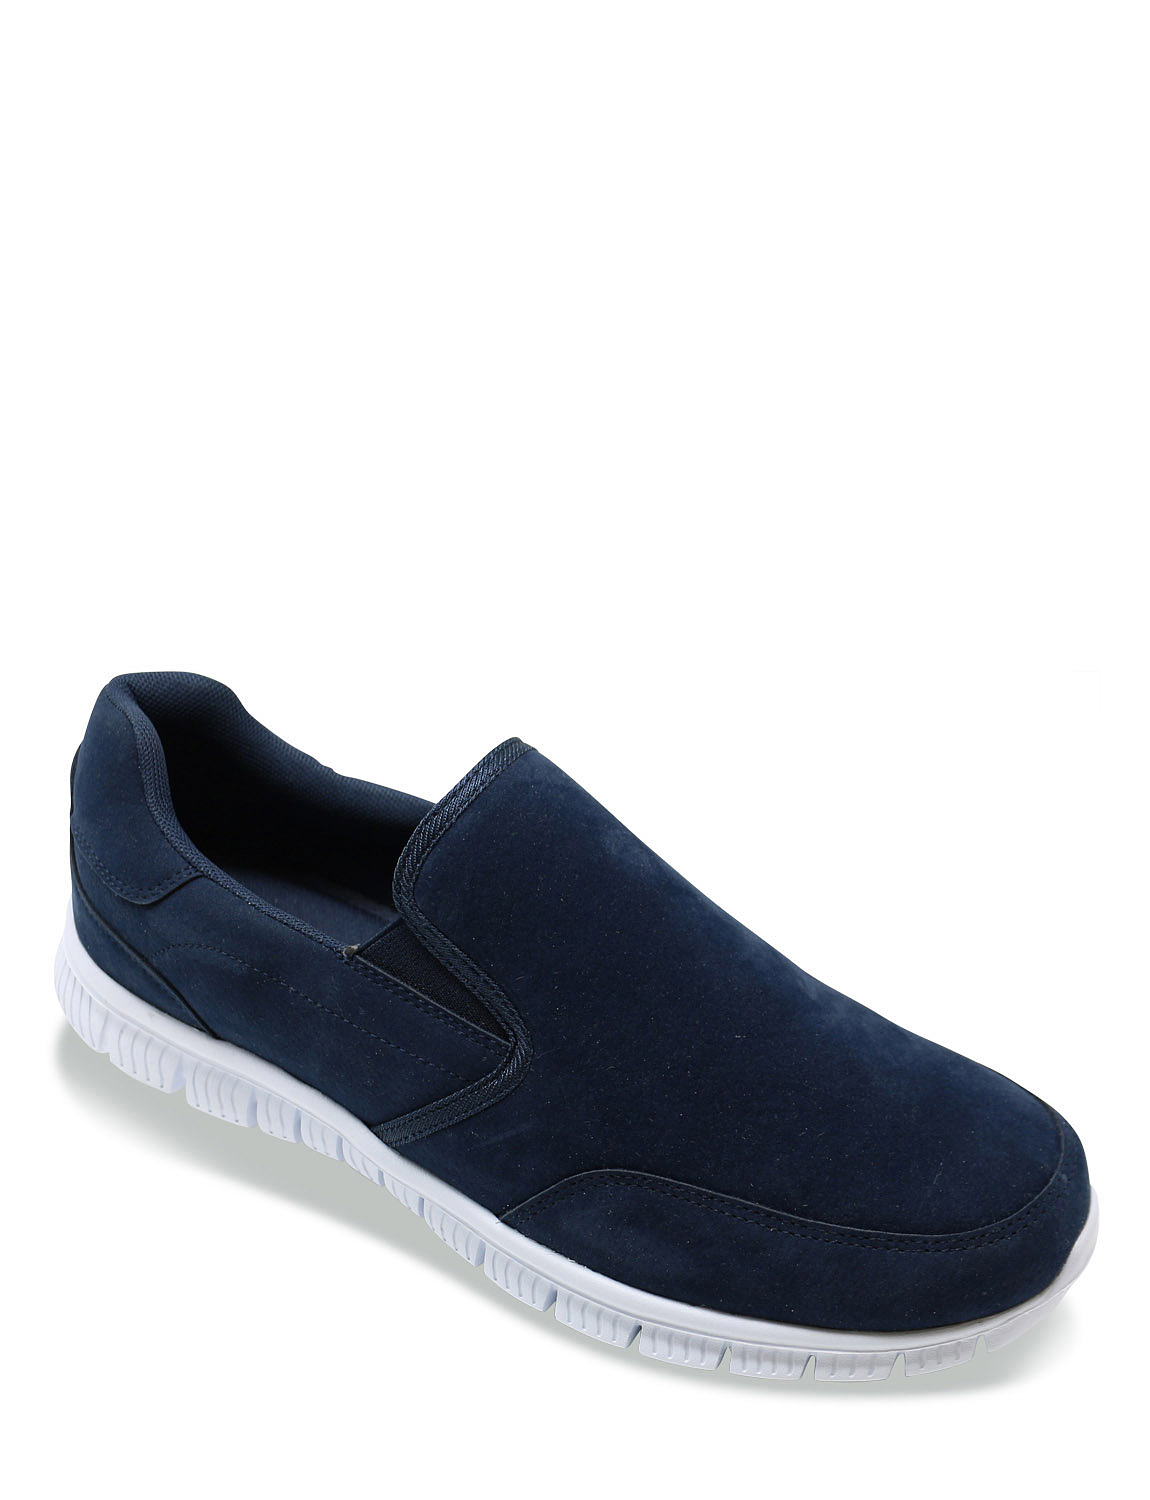 Cushion Walk Wide Fit Slip On Trainers 